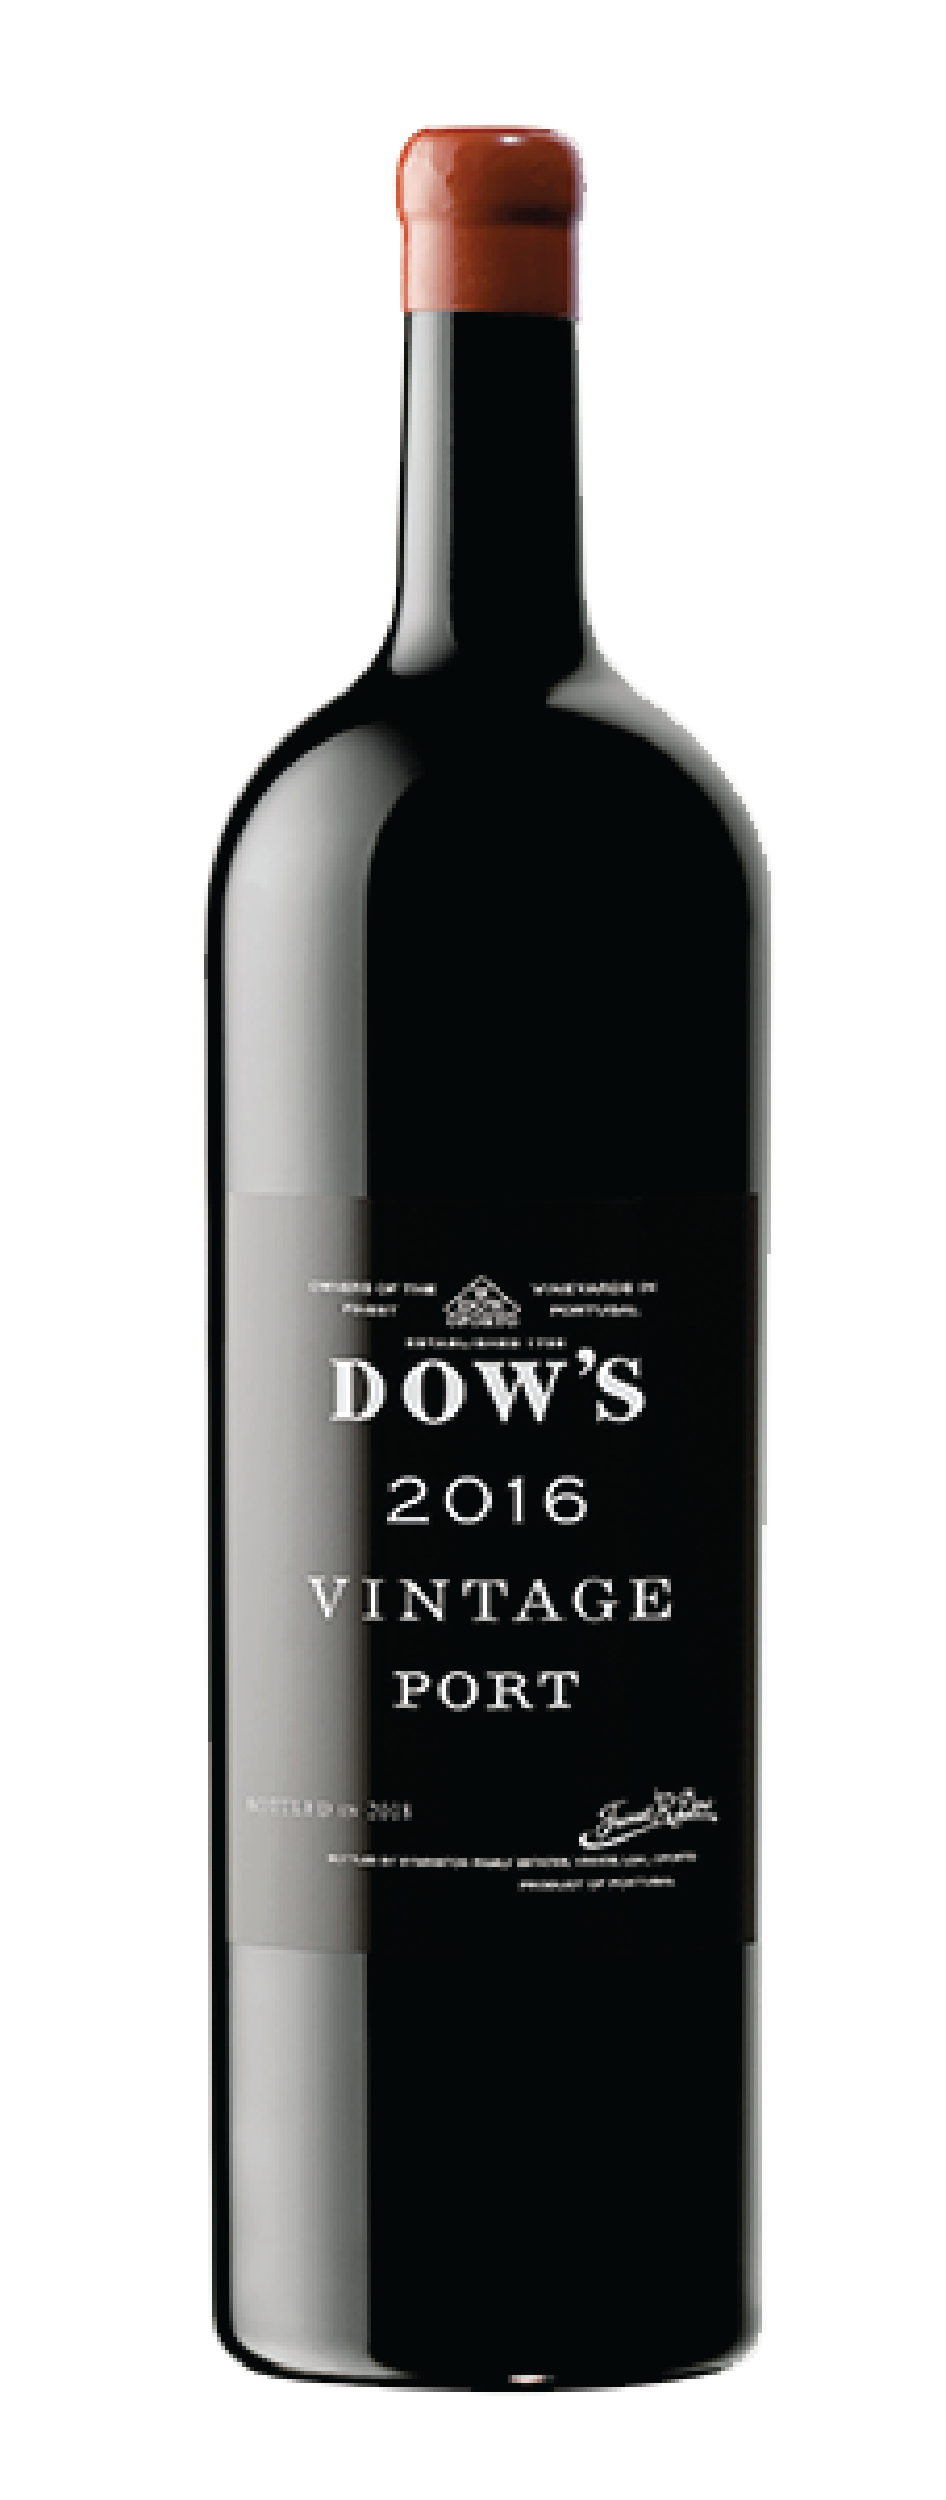 Product Image for DOW'S VINTAGE PORT 2016 - DOUBLE MAGNUM (3L)